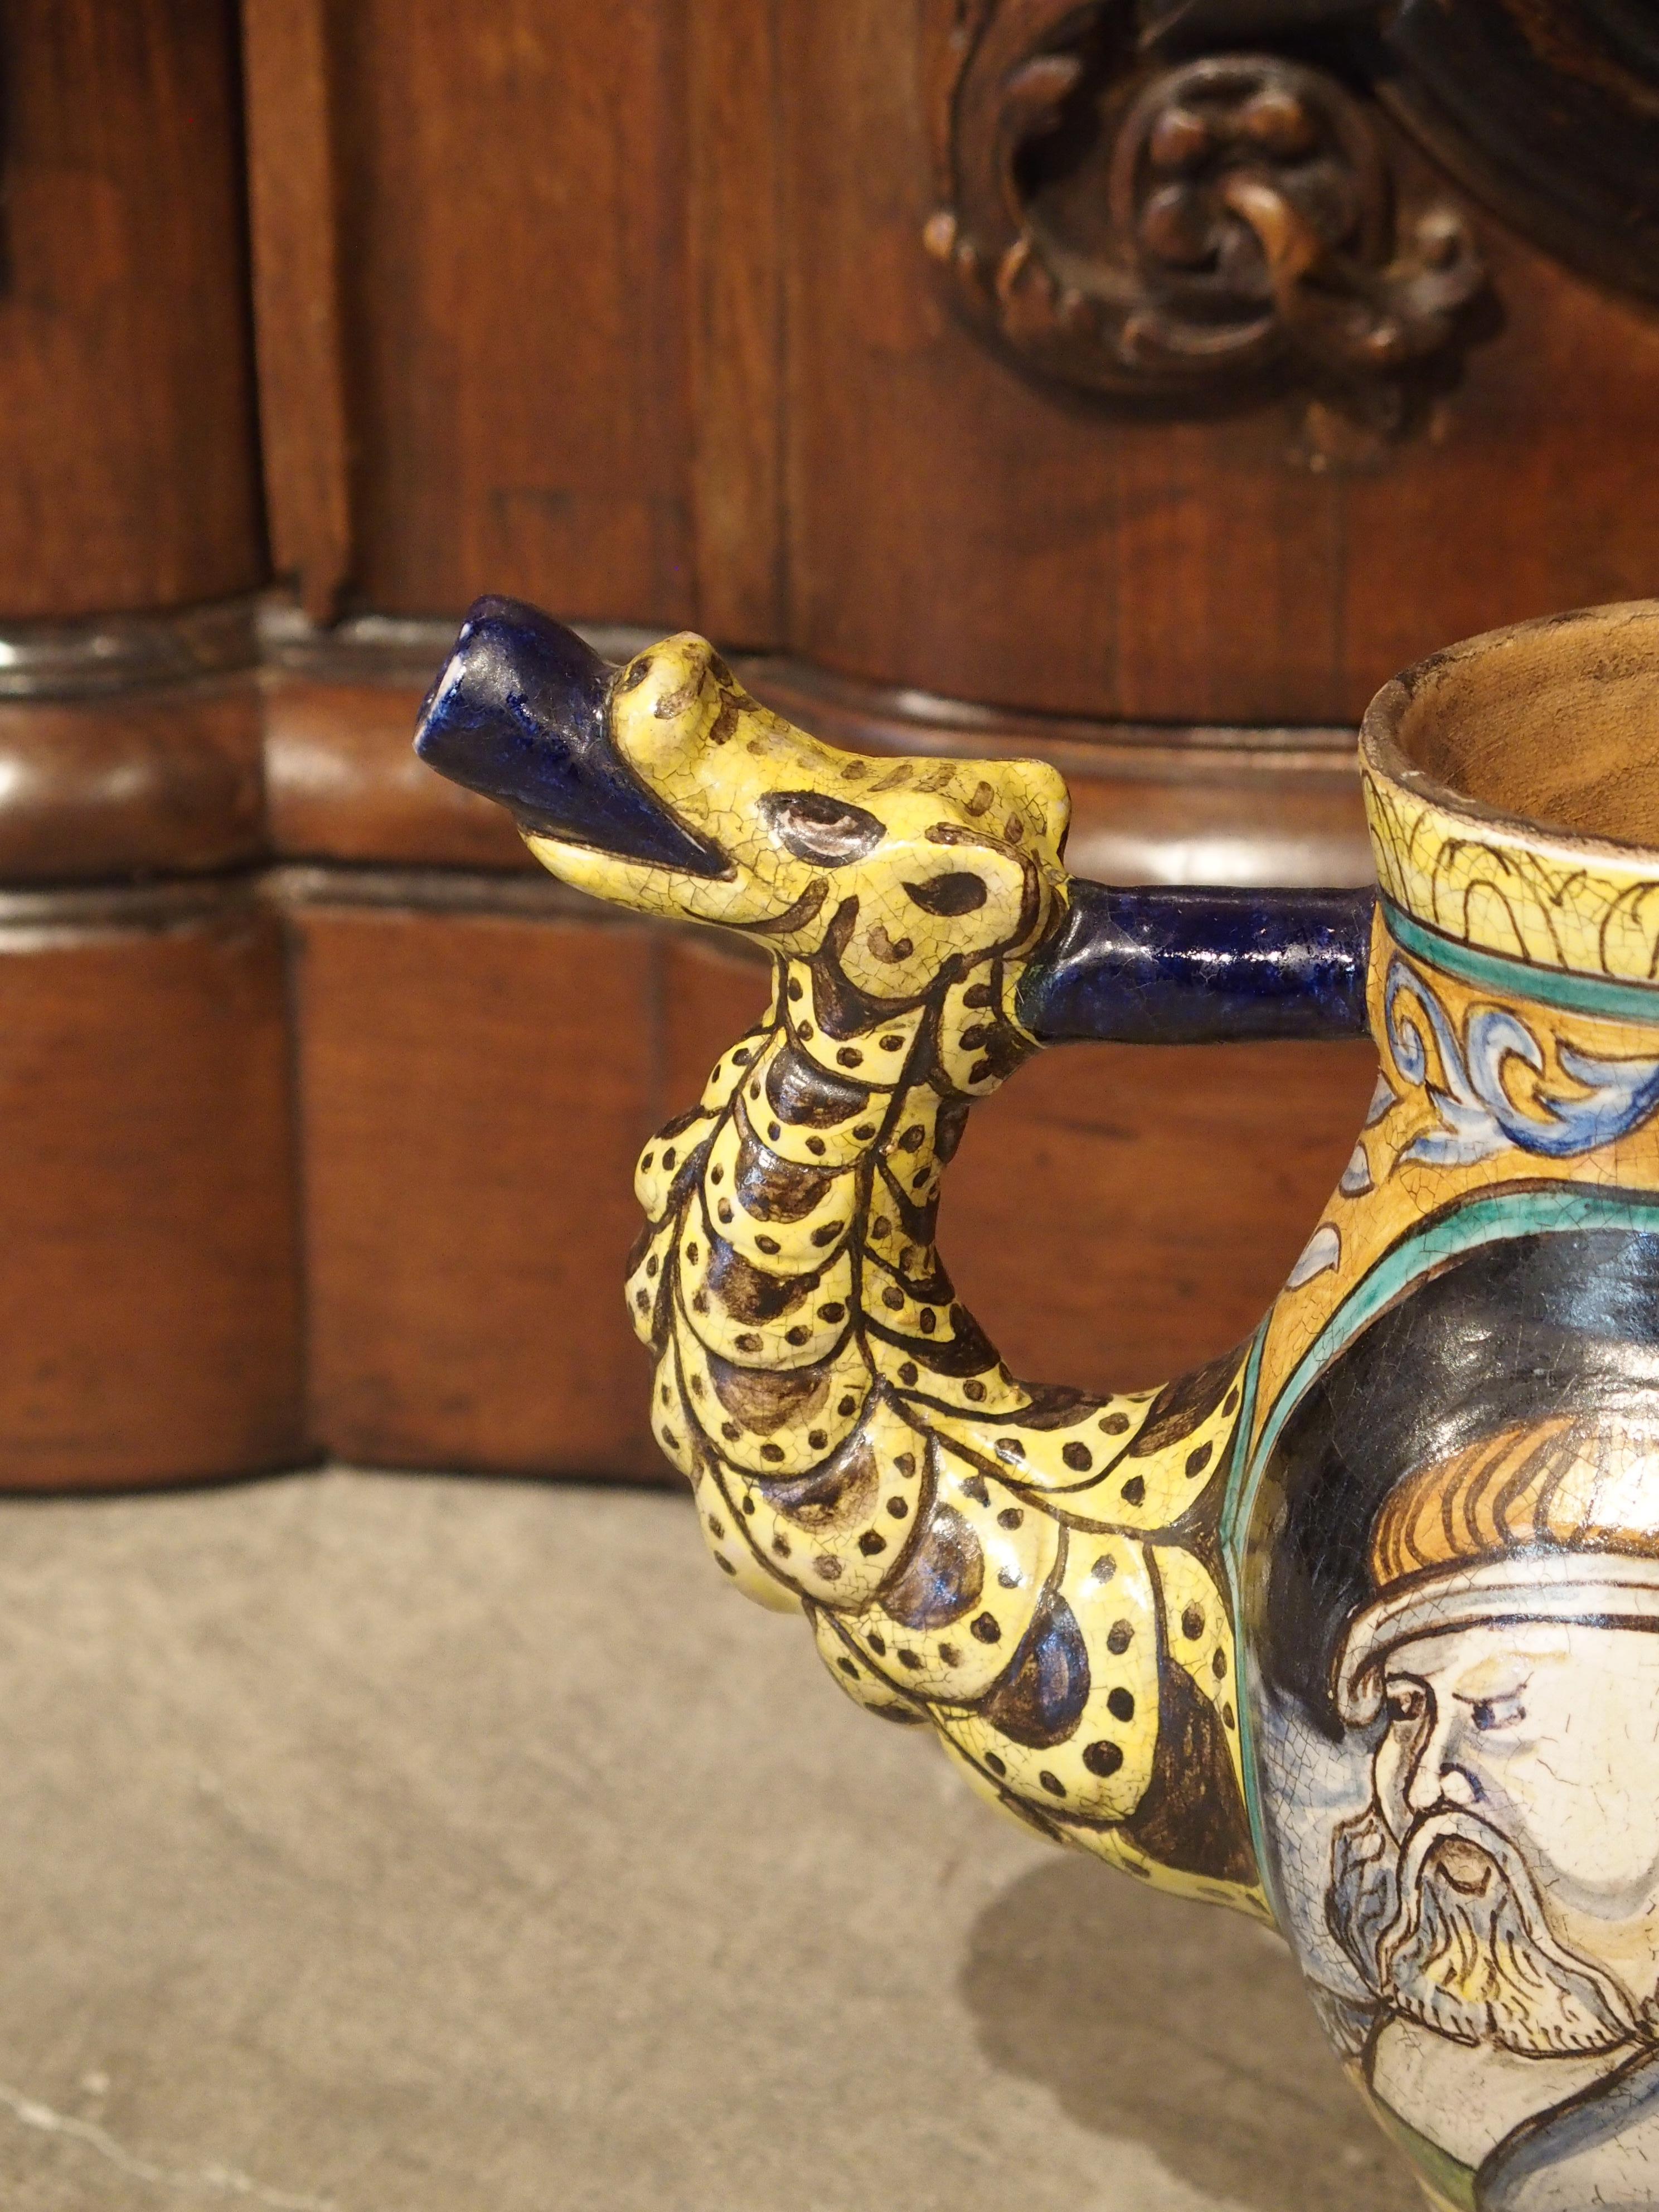 From Italy, this majolica apothecary pitcher (orciuolo) is in the manner of the pitcher done by Castelli, circa 1520, housed in the MET Museum NYC, The Robert Lehman collection, 1975.

The hand painted pitcher below dates to the early 1900s, and